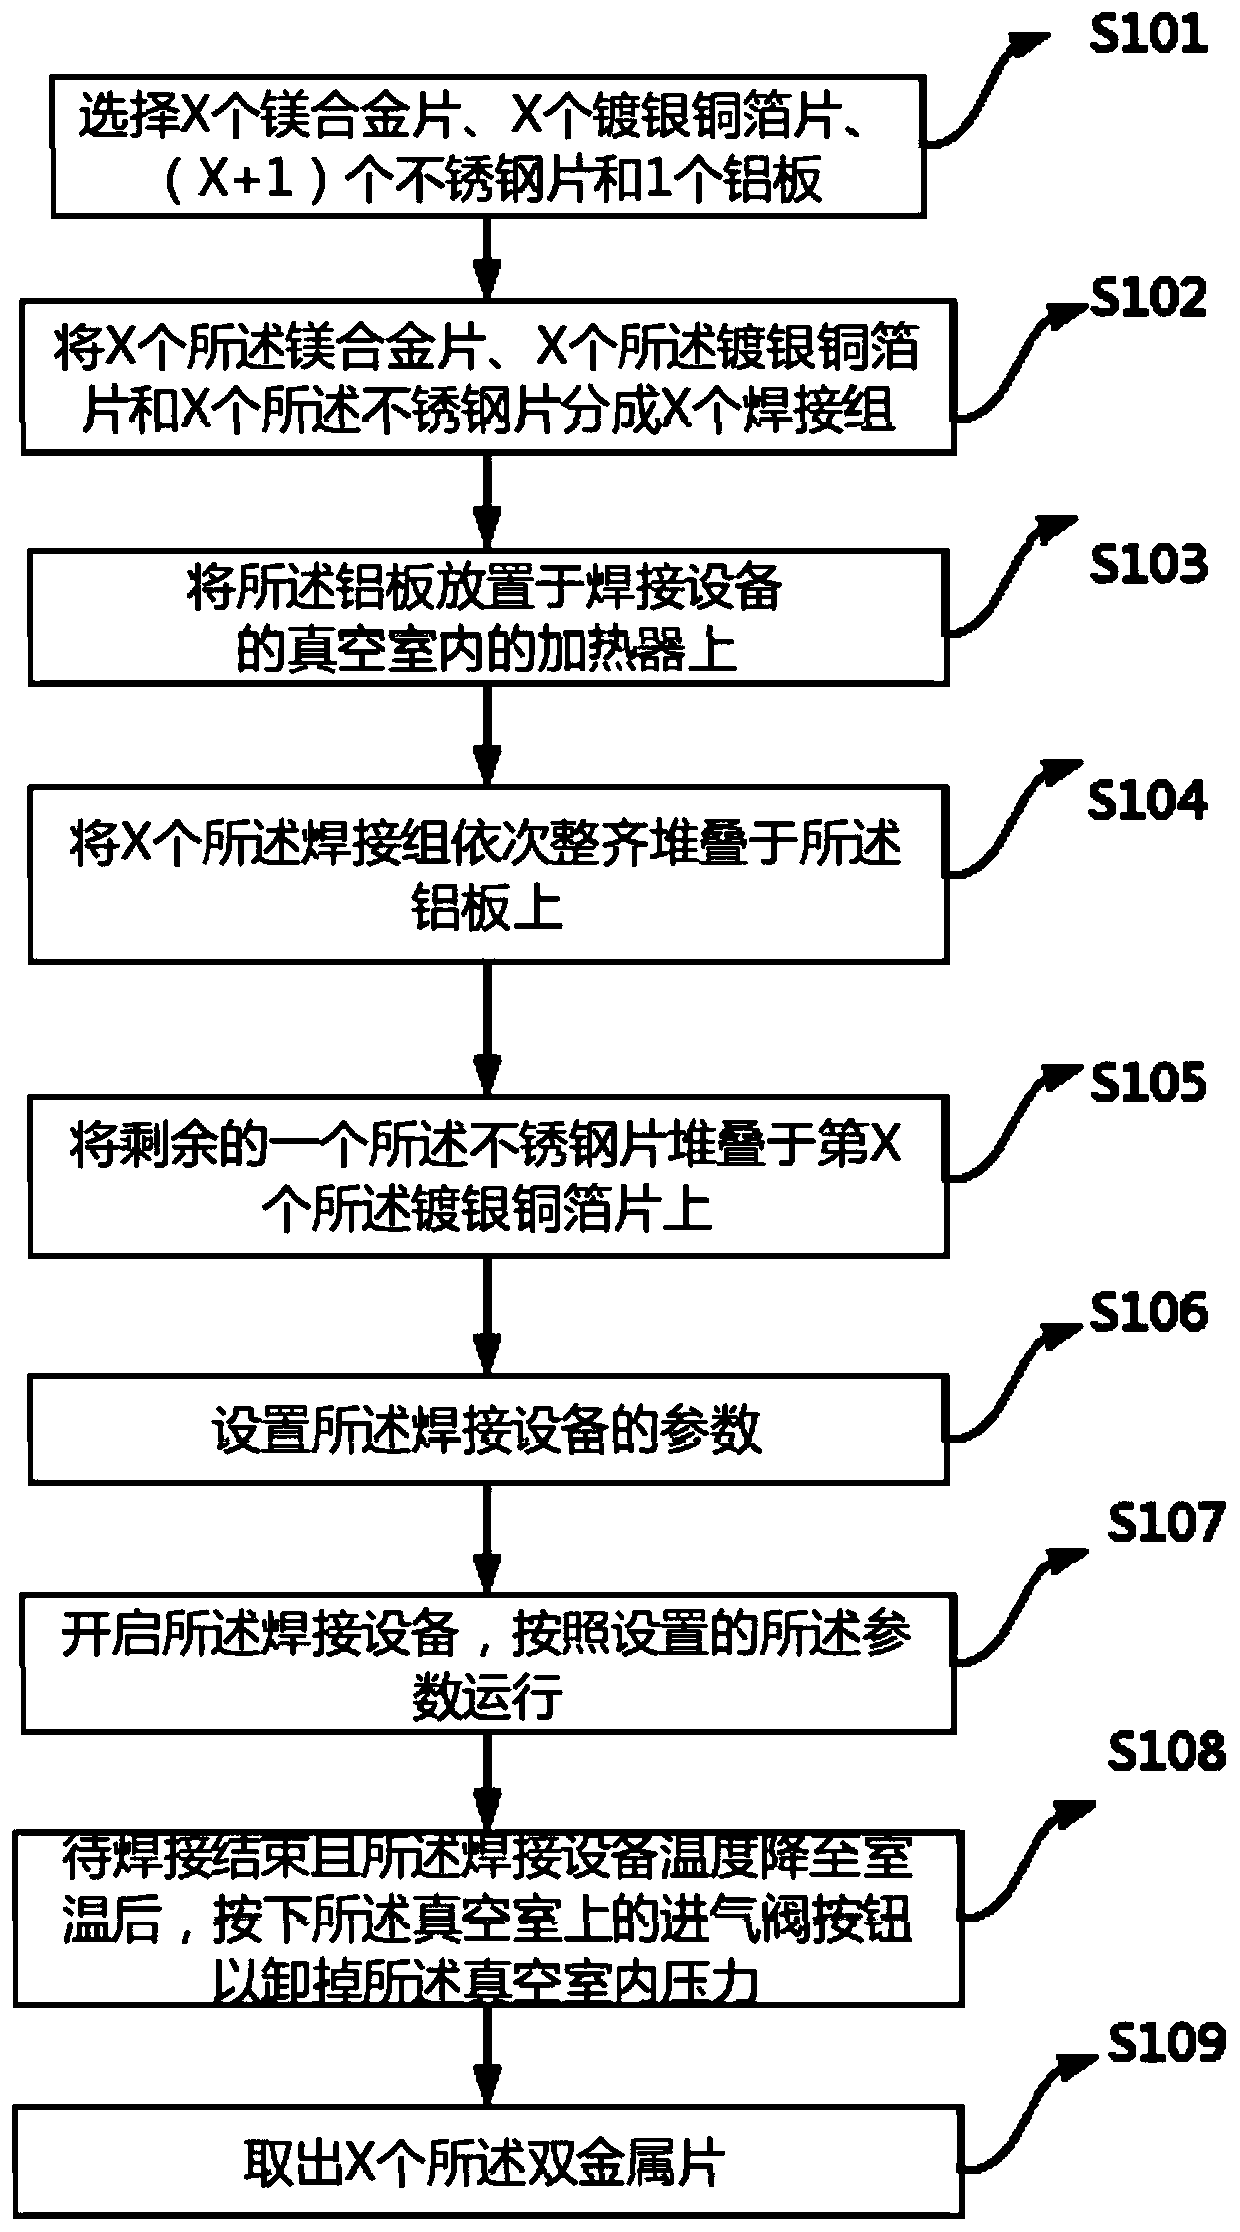 Preparation method of bimetallic strip of magnesium alloy and silver-plated copper foil